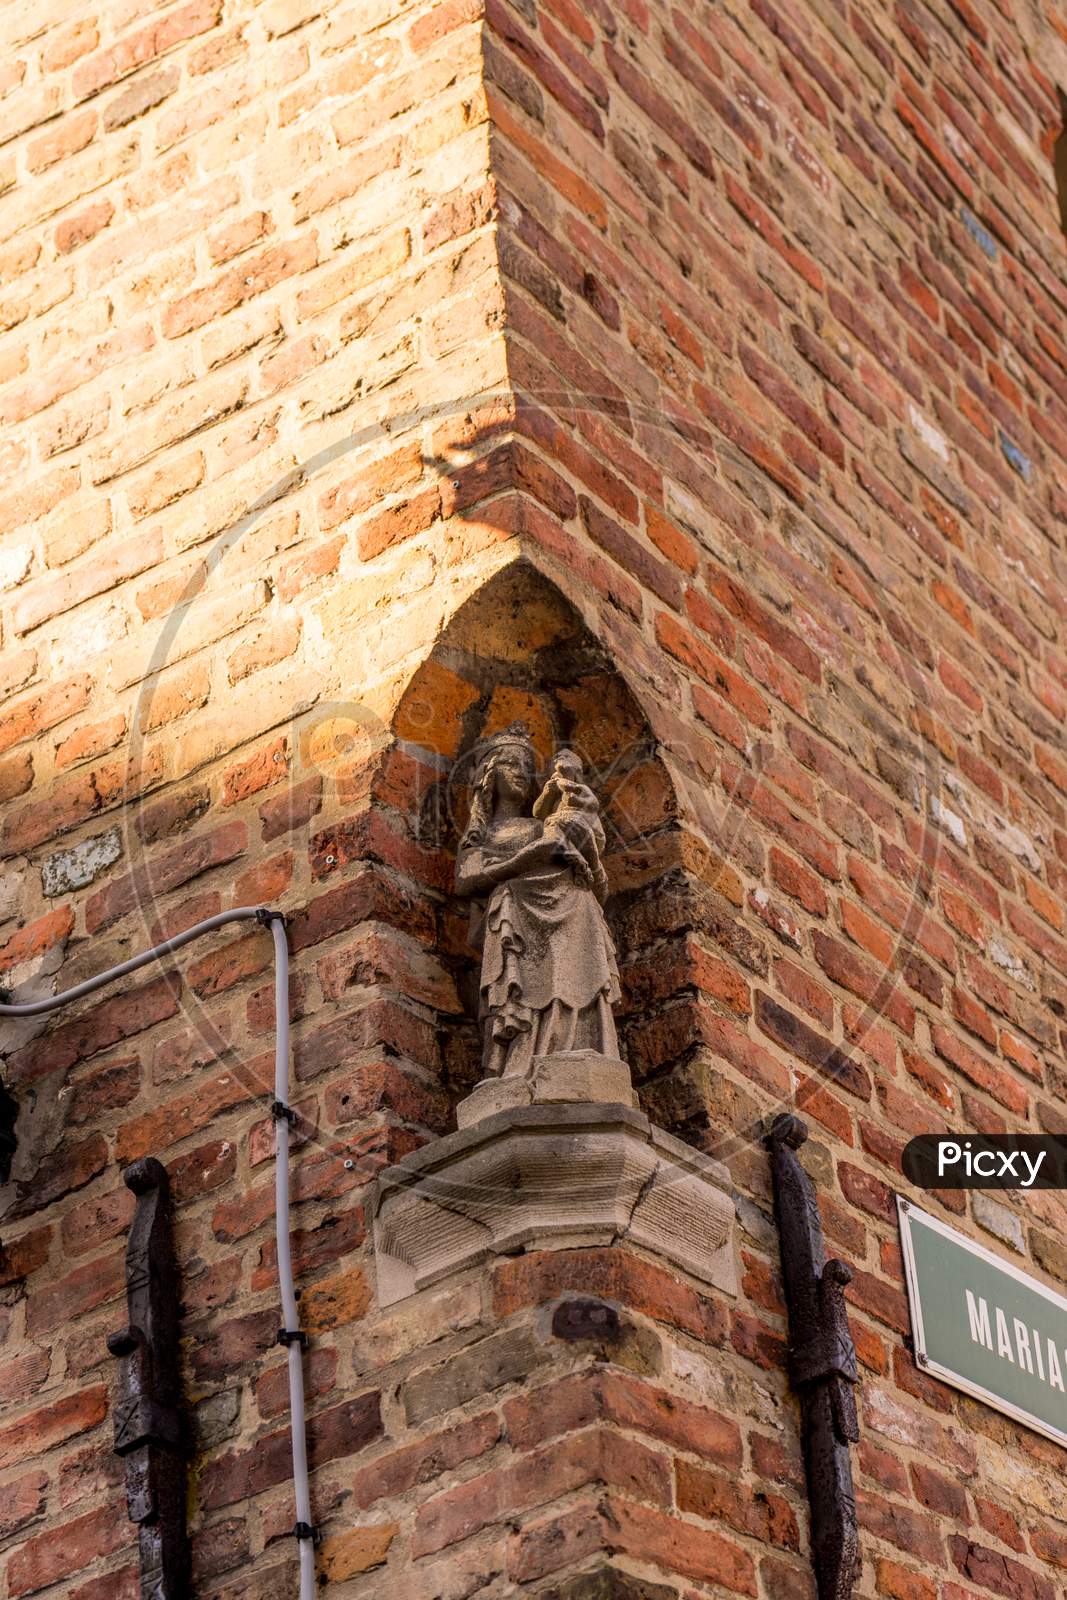 Belgium, Bruges, A Close Up Of A Brick Building With Sculpture Of Madonna And Baby Christ